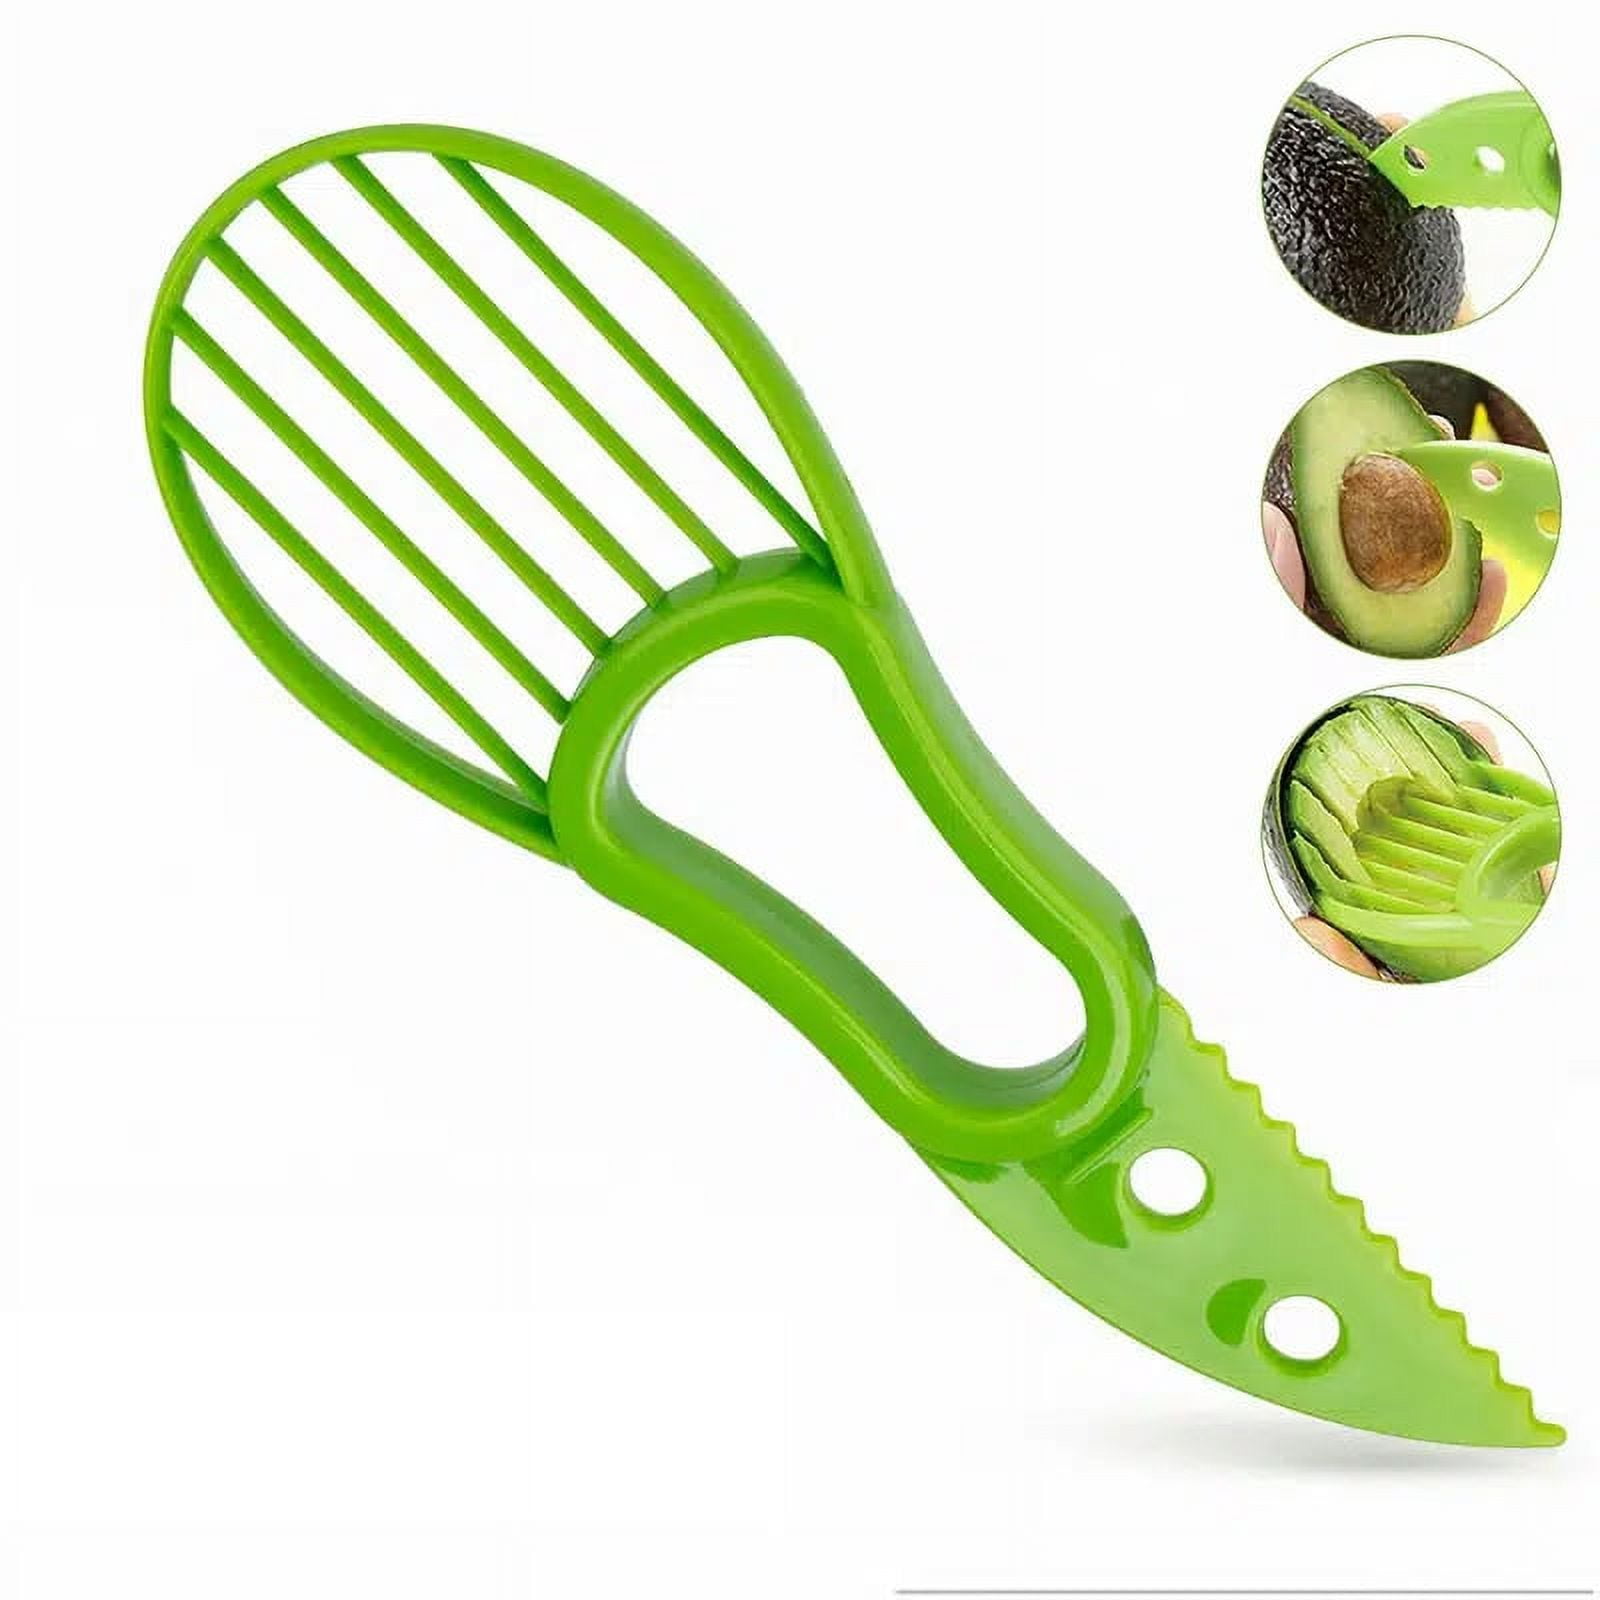 Avocado Slicer 3 In 1 With Silicon Handle Core Division Multi-function  Fruit Knife Avocado Pulp